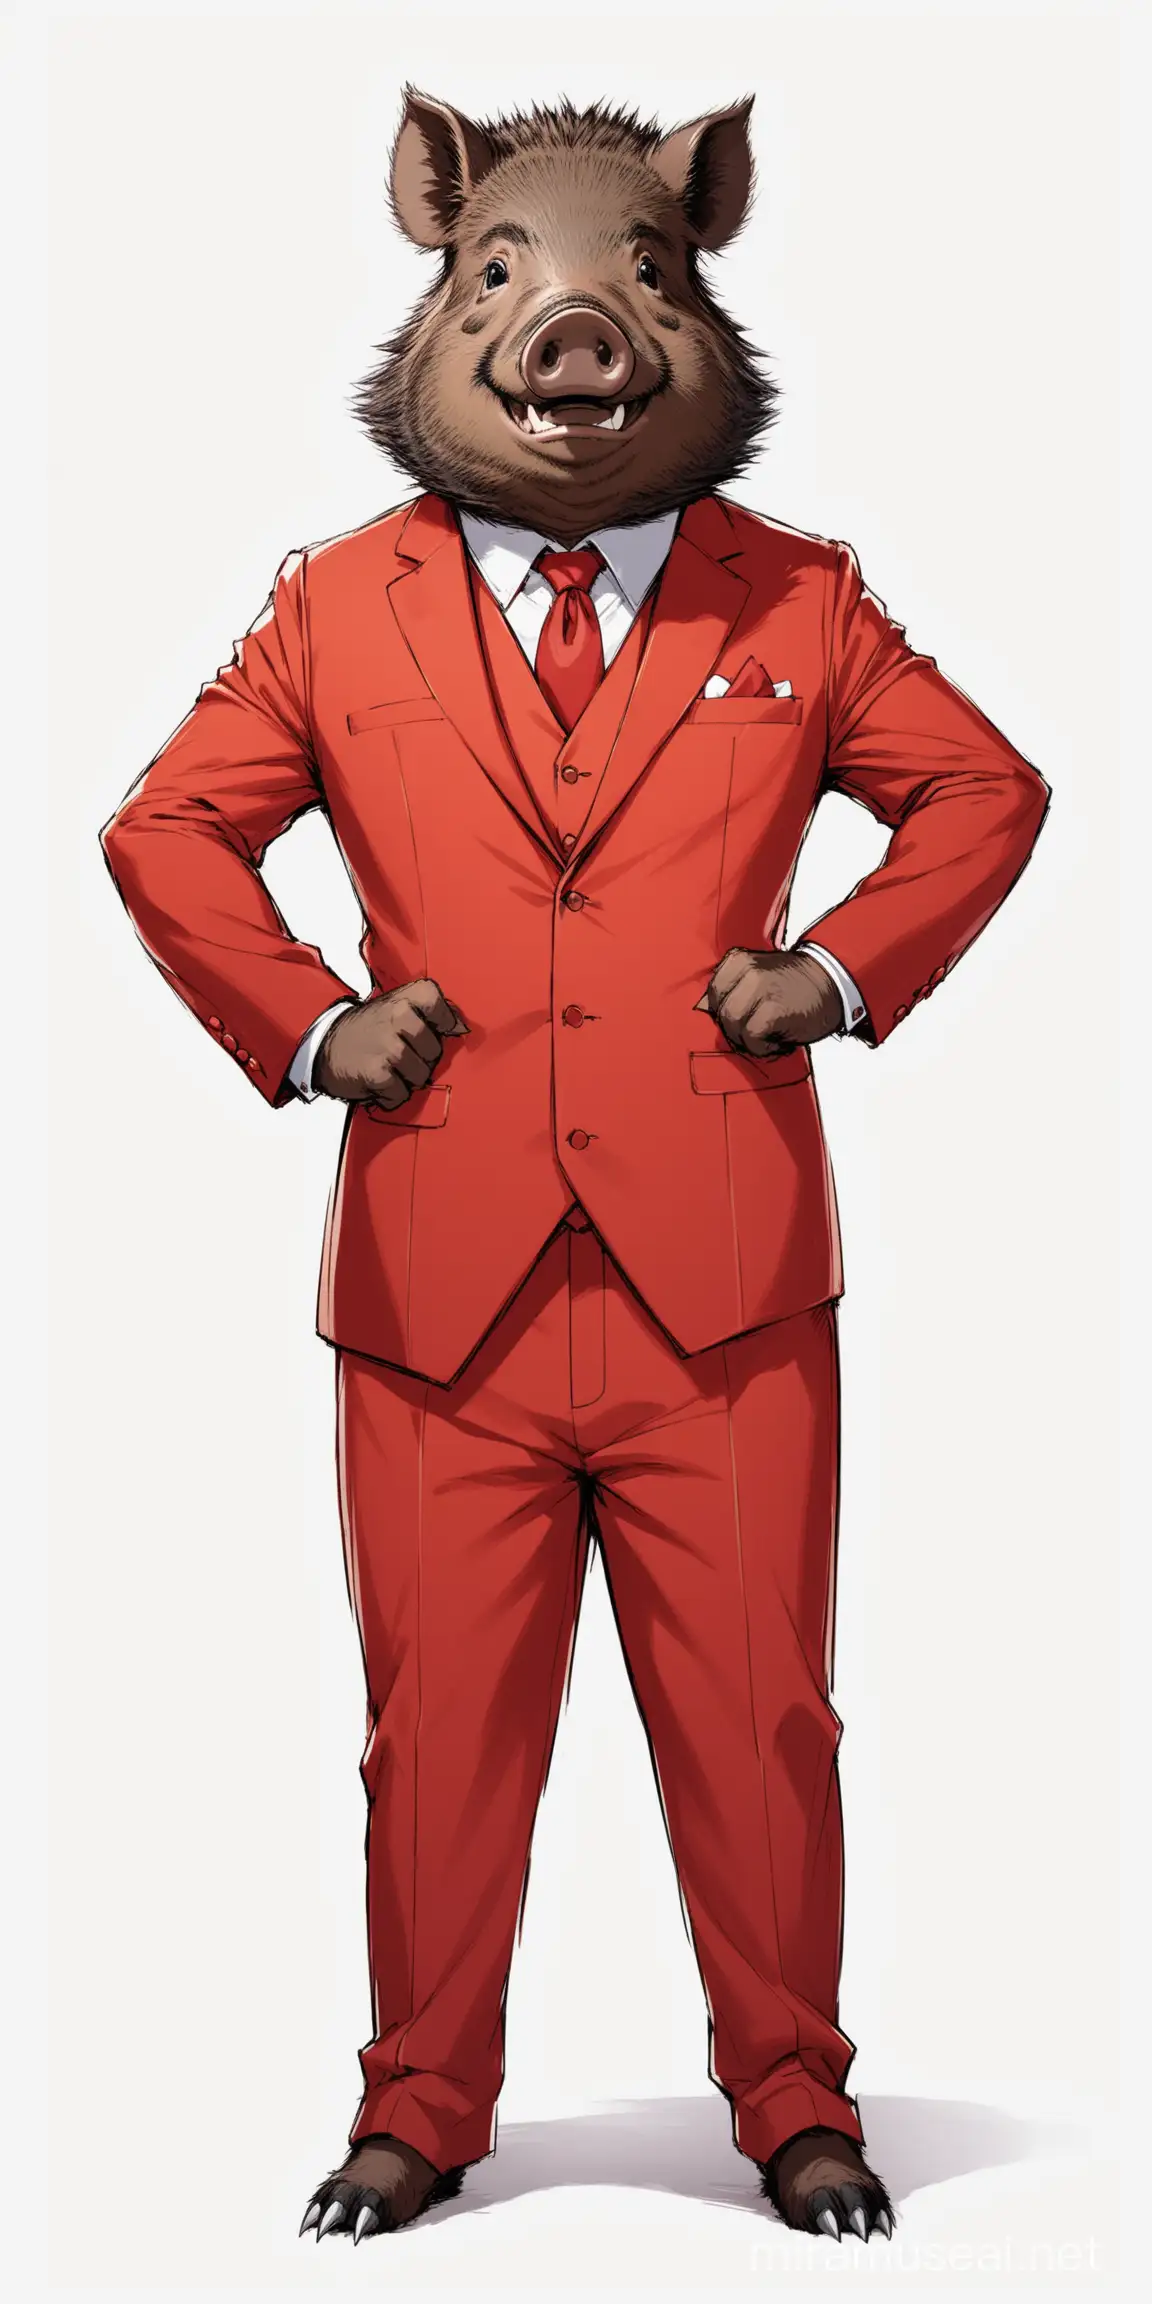 In front of you on a white background is a wild boar standing like a man dressed in an red three-piece suit. He smiles at you like an old friend.